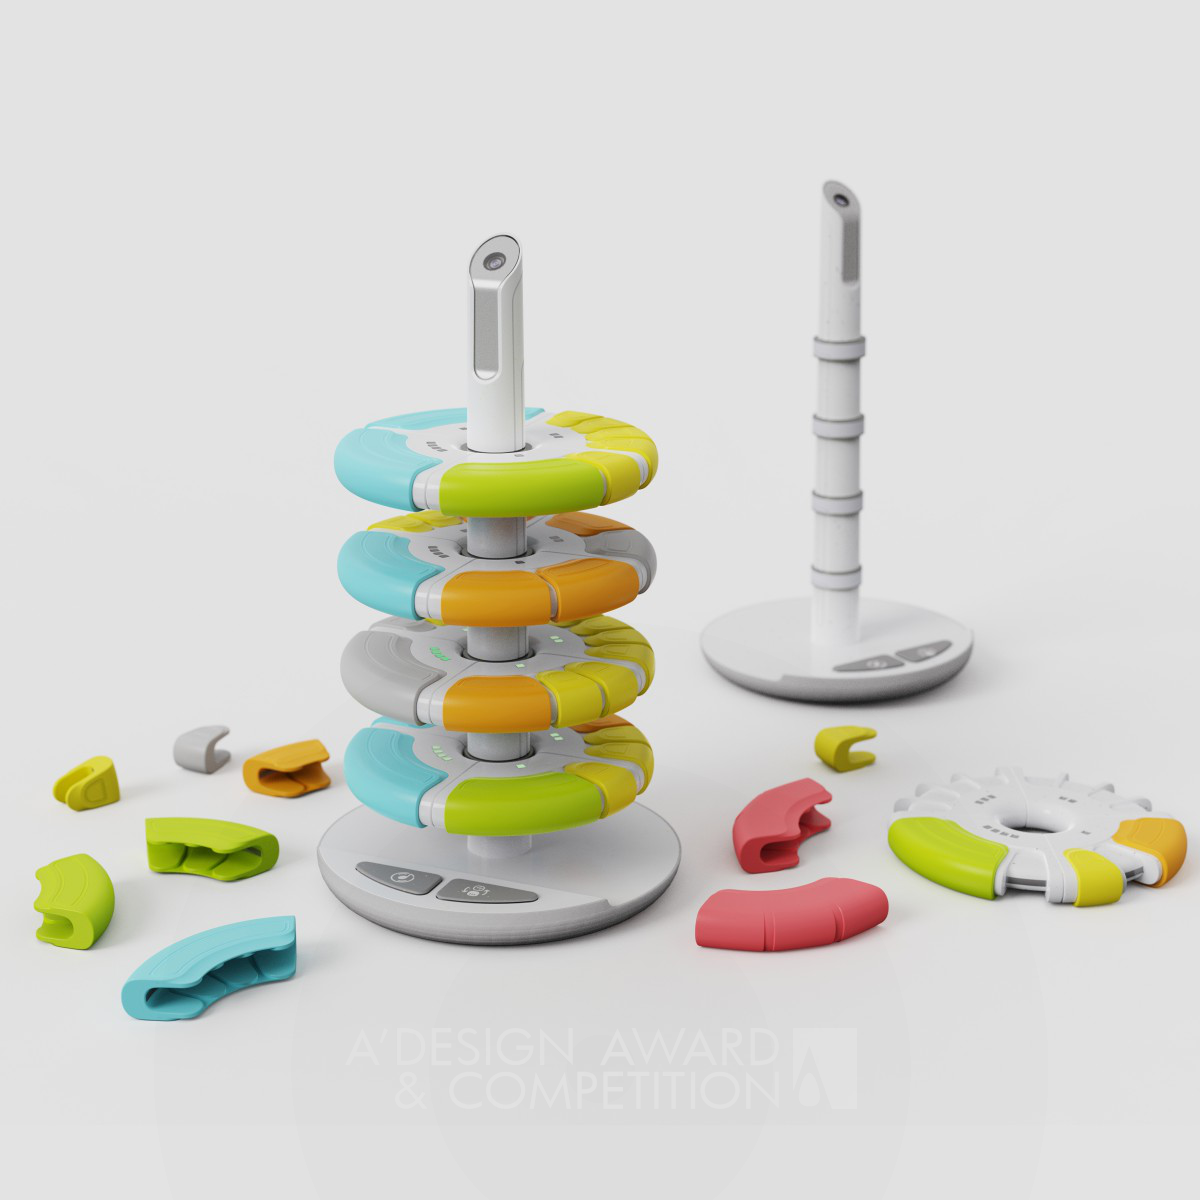 Poly Beat Rhythm Exercises Toy by Haoye Dong, Kecheng Jin and Xueyan Cai Iron Toys, Games and Hobby Products Design Award Winner 2024 